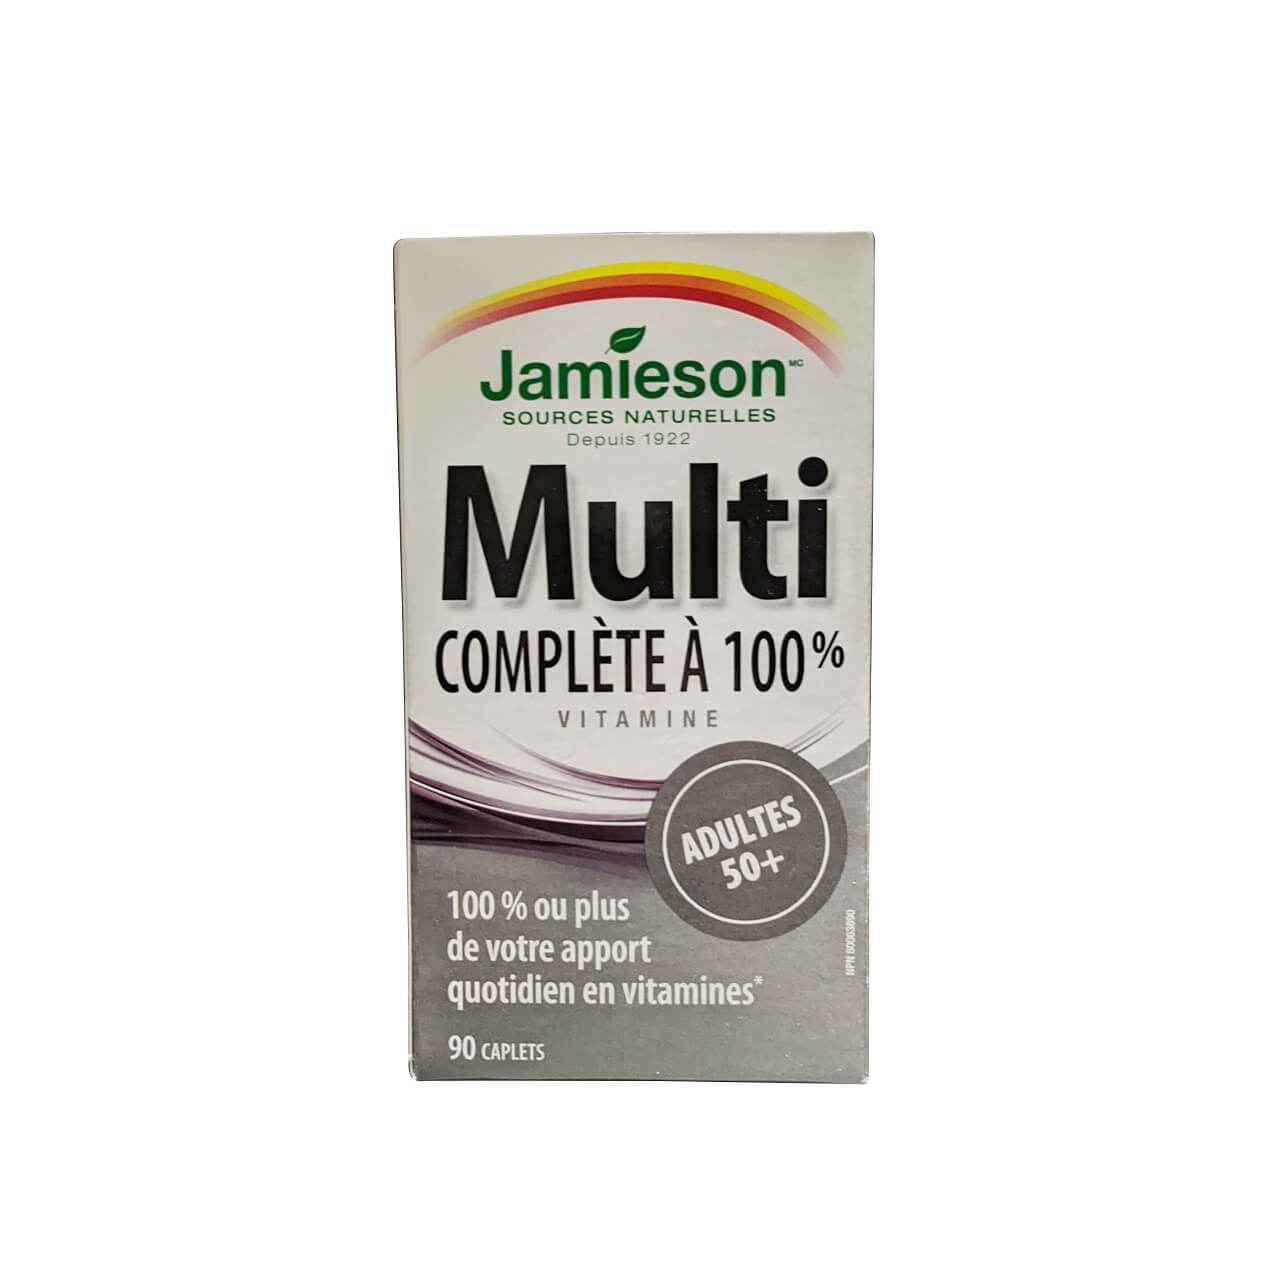 Product label for Jamieson Multi 100% Complete Vitamin for Adults 50+ (90 caplets) in French